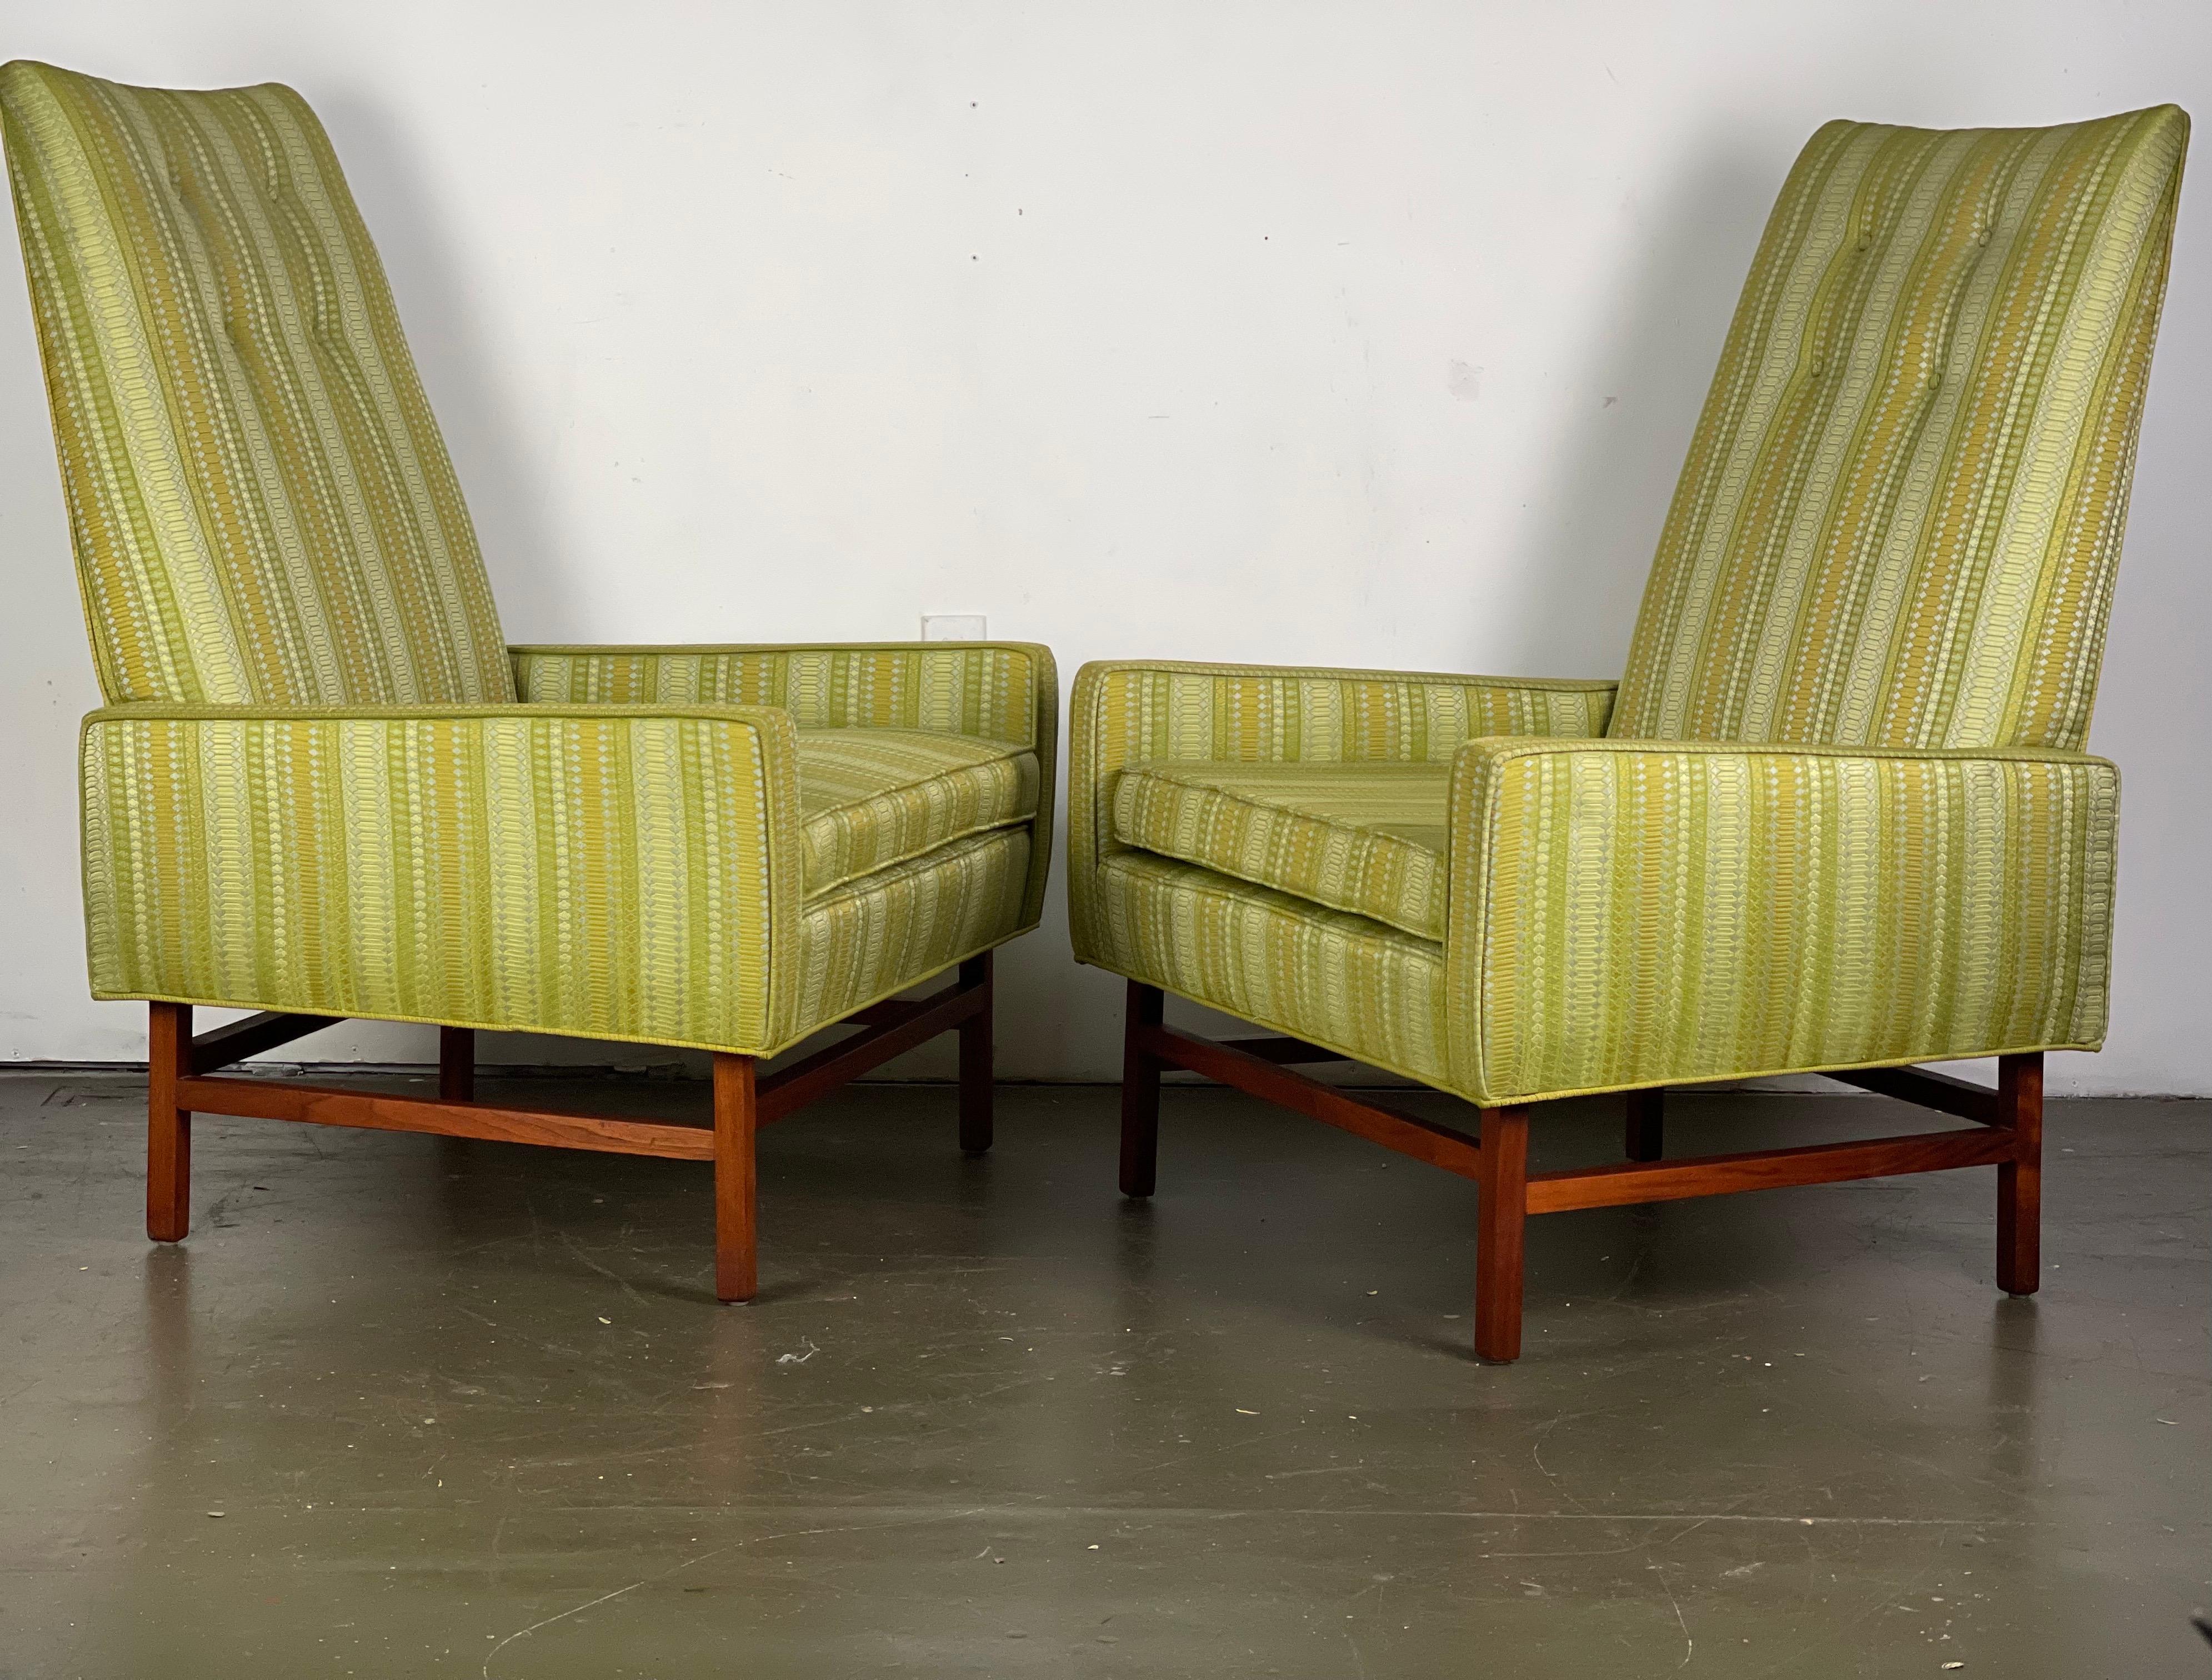 Throne Chairs in Alexander Girard Fabric by Edward Axel Roffman for B. Altman's  5